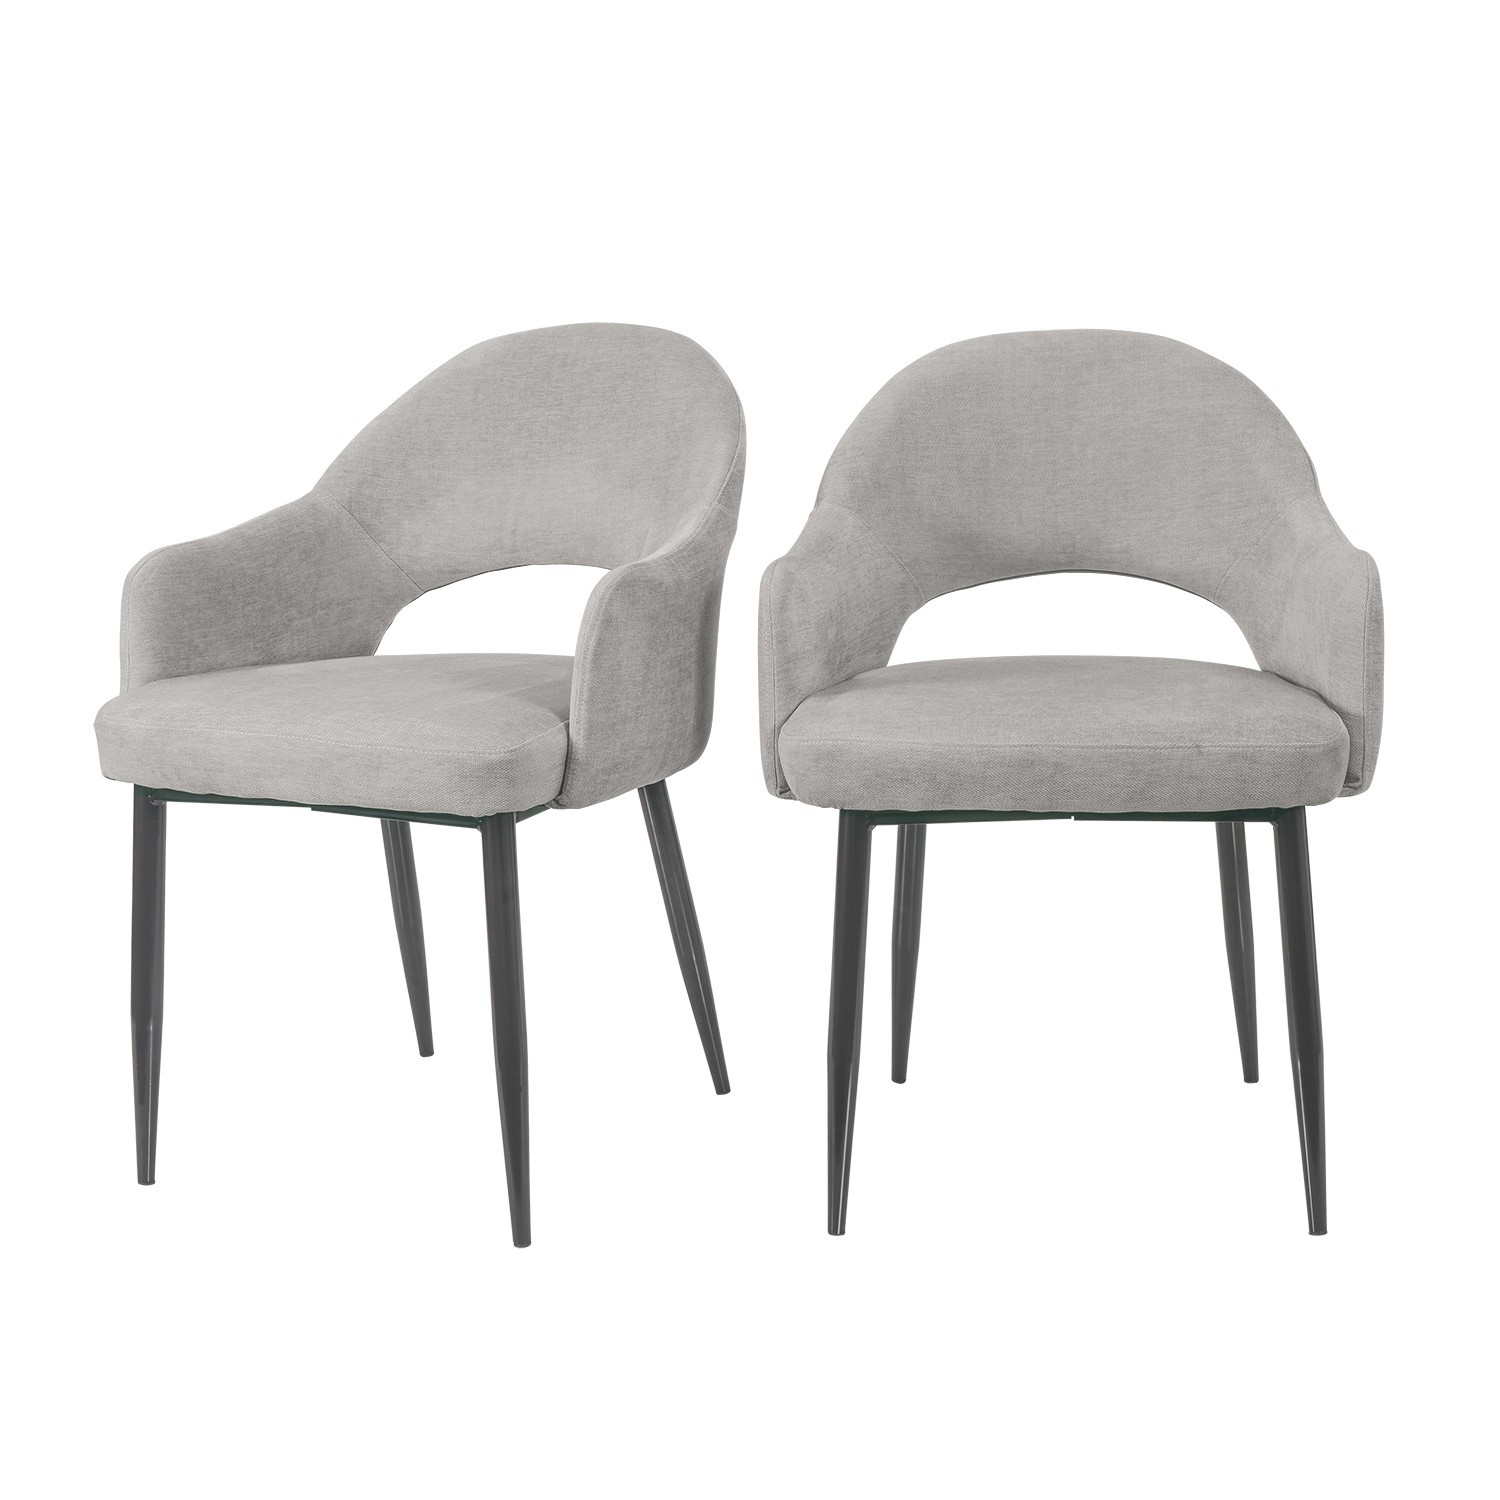 Photo of Set of 2 grey fabric dining chairs - colbie